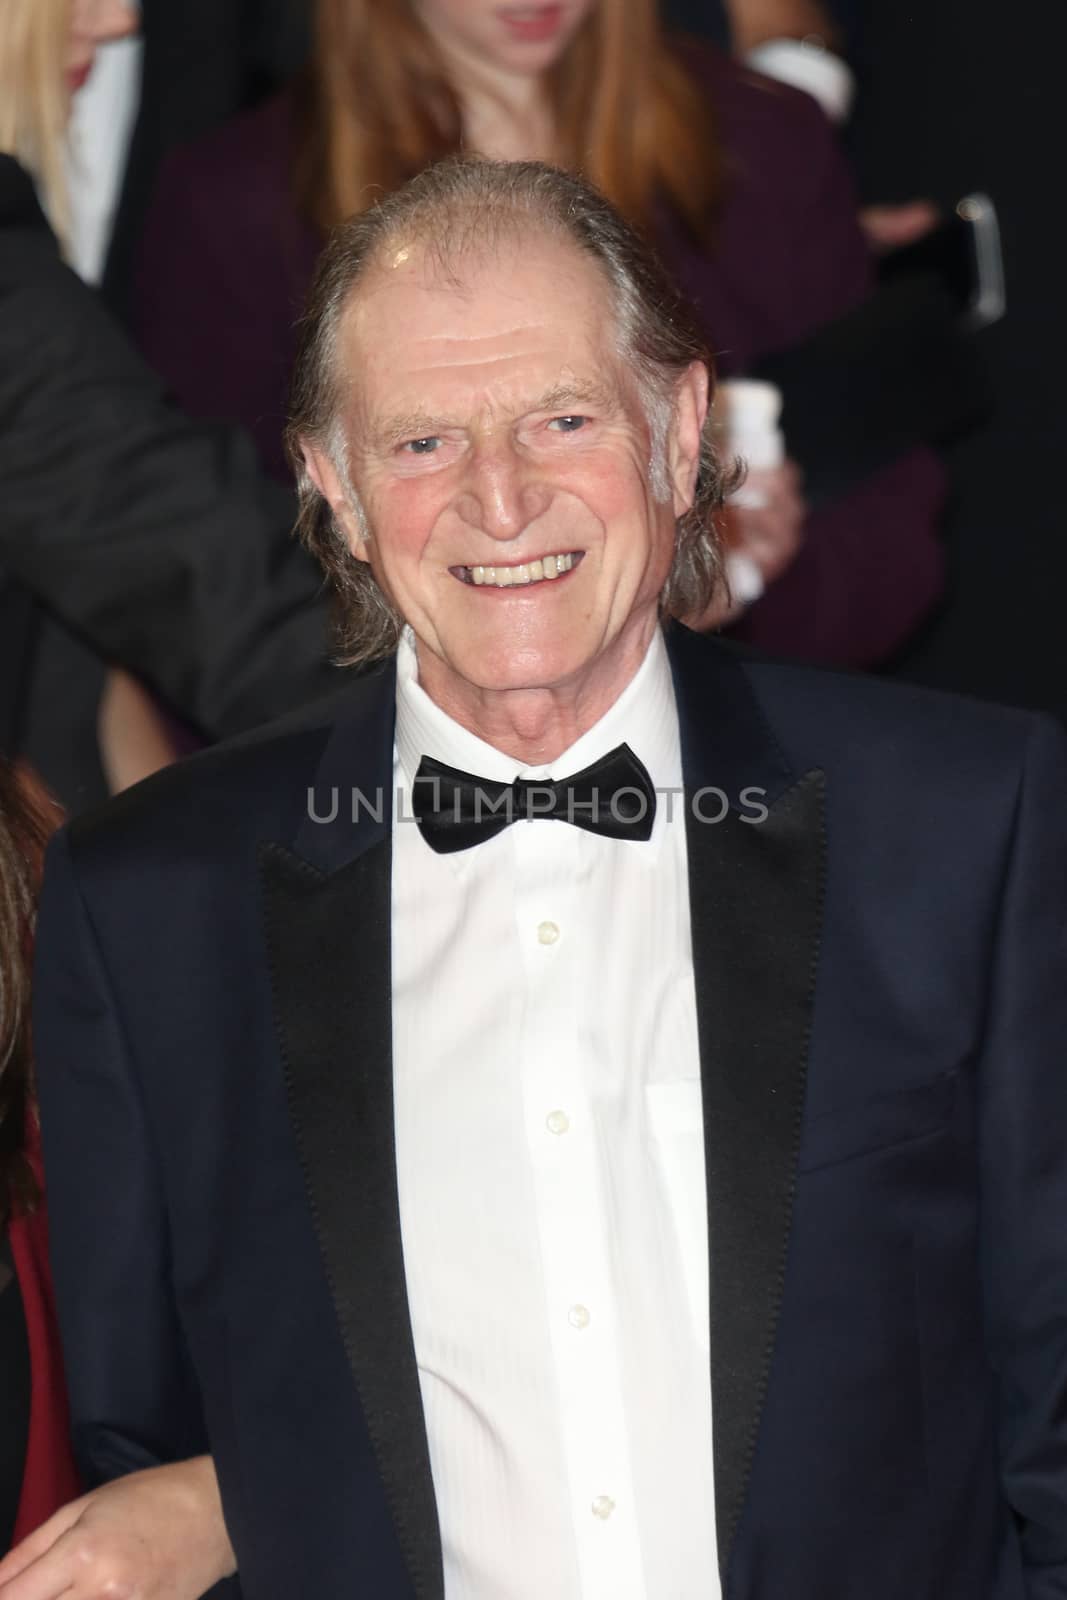 UNITED KINGDOM, London: David Bradley attends the world premiere of the latest Bond film, Spectre, at Royal Albert Hall in London on October 26, 2015.